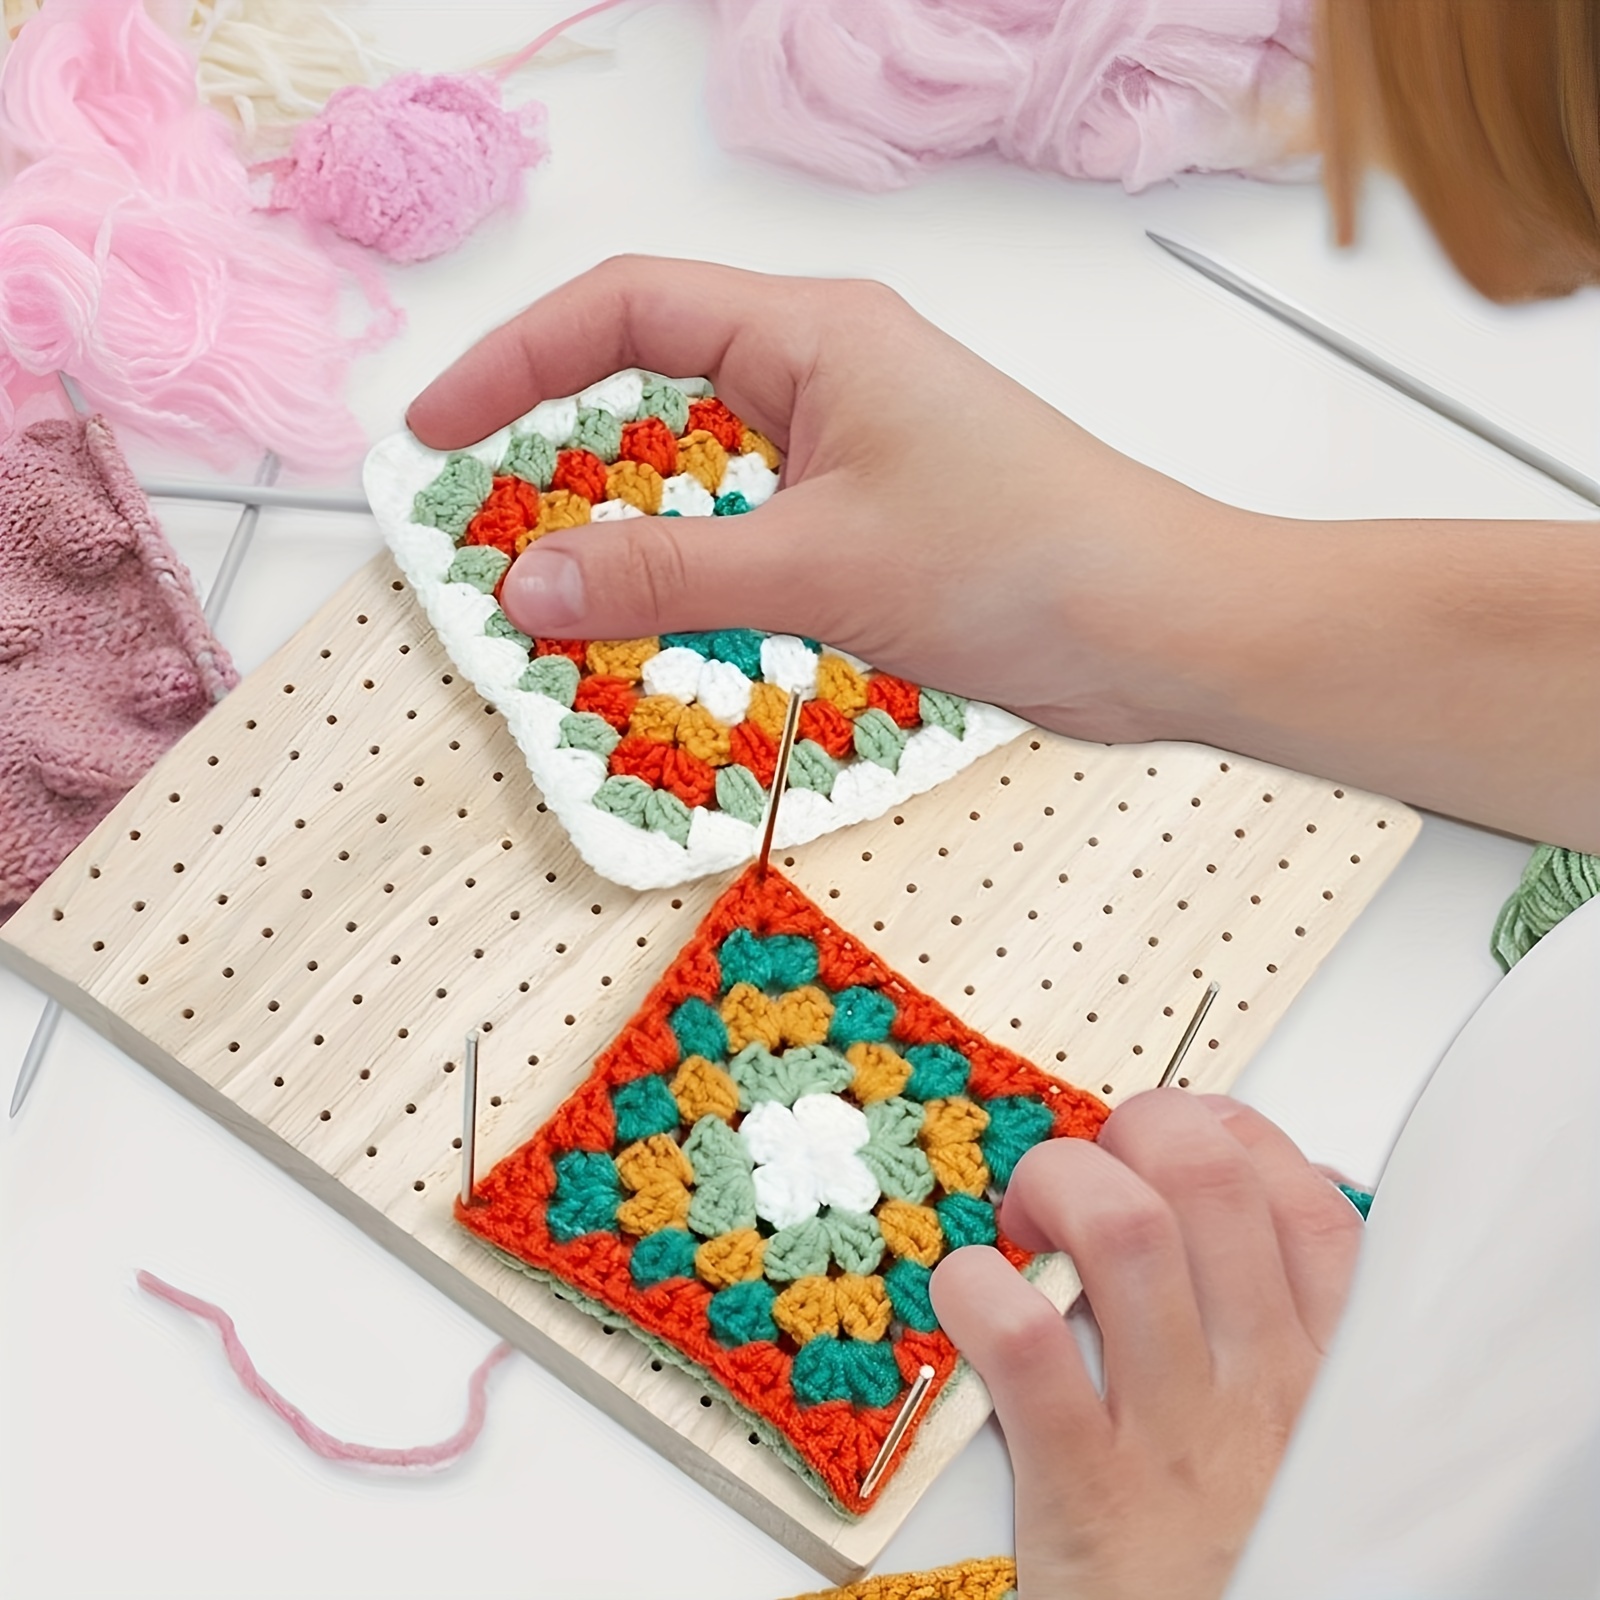  Wooden Crochet Blocking Board with 20 Stainless Steel Rods,  Reusable Handcrafted Knitting Blocking Mat Set 11.6x11.6 Inch, Crochet Gift  for Granny Square